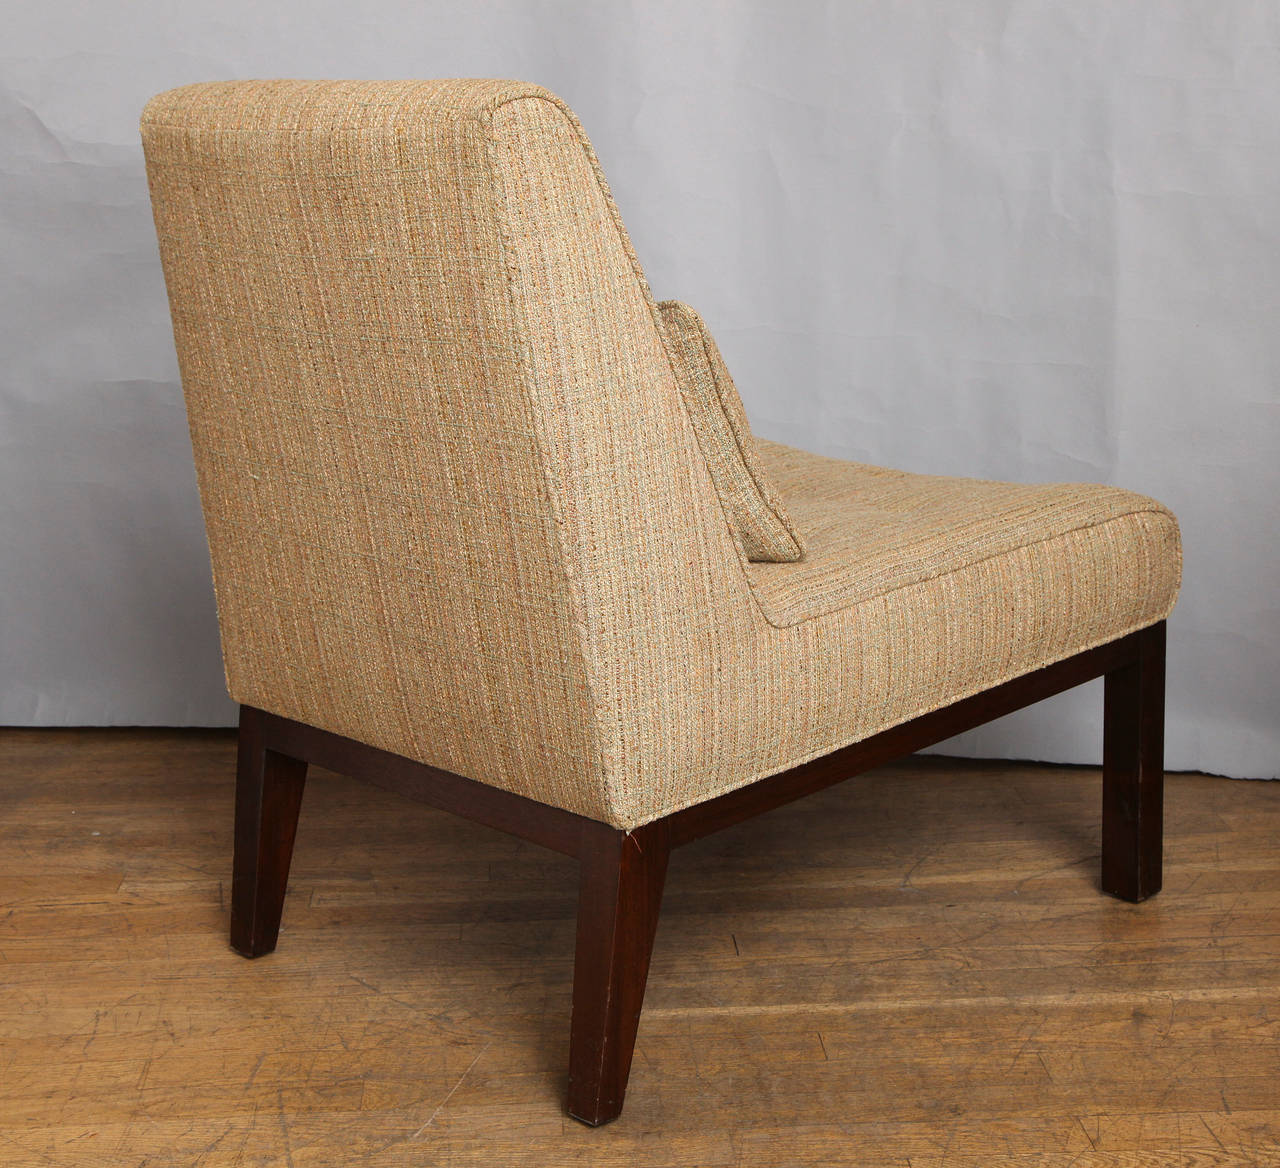 A Pair of Mid-Century Modern Edward Wormley for Dunbar Slipper Chairs For Sale 1